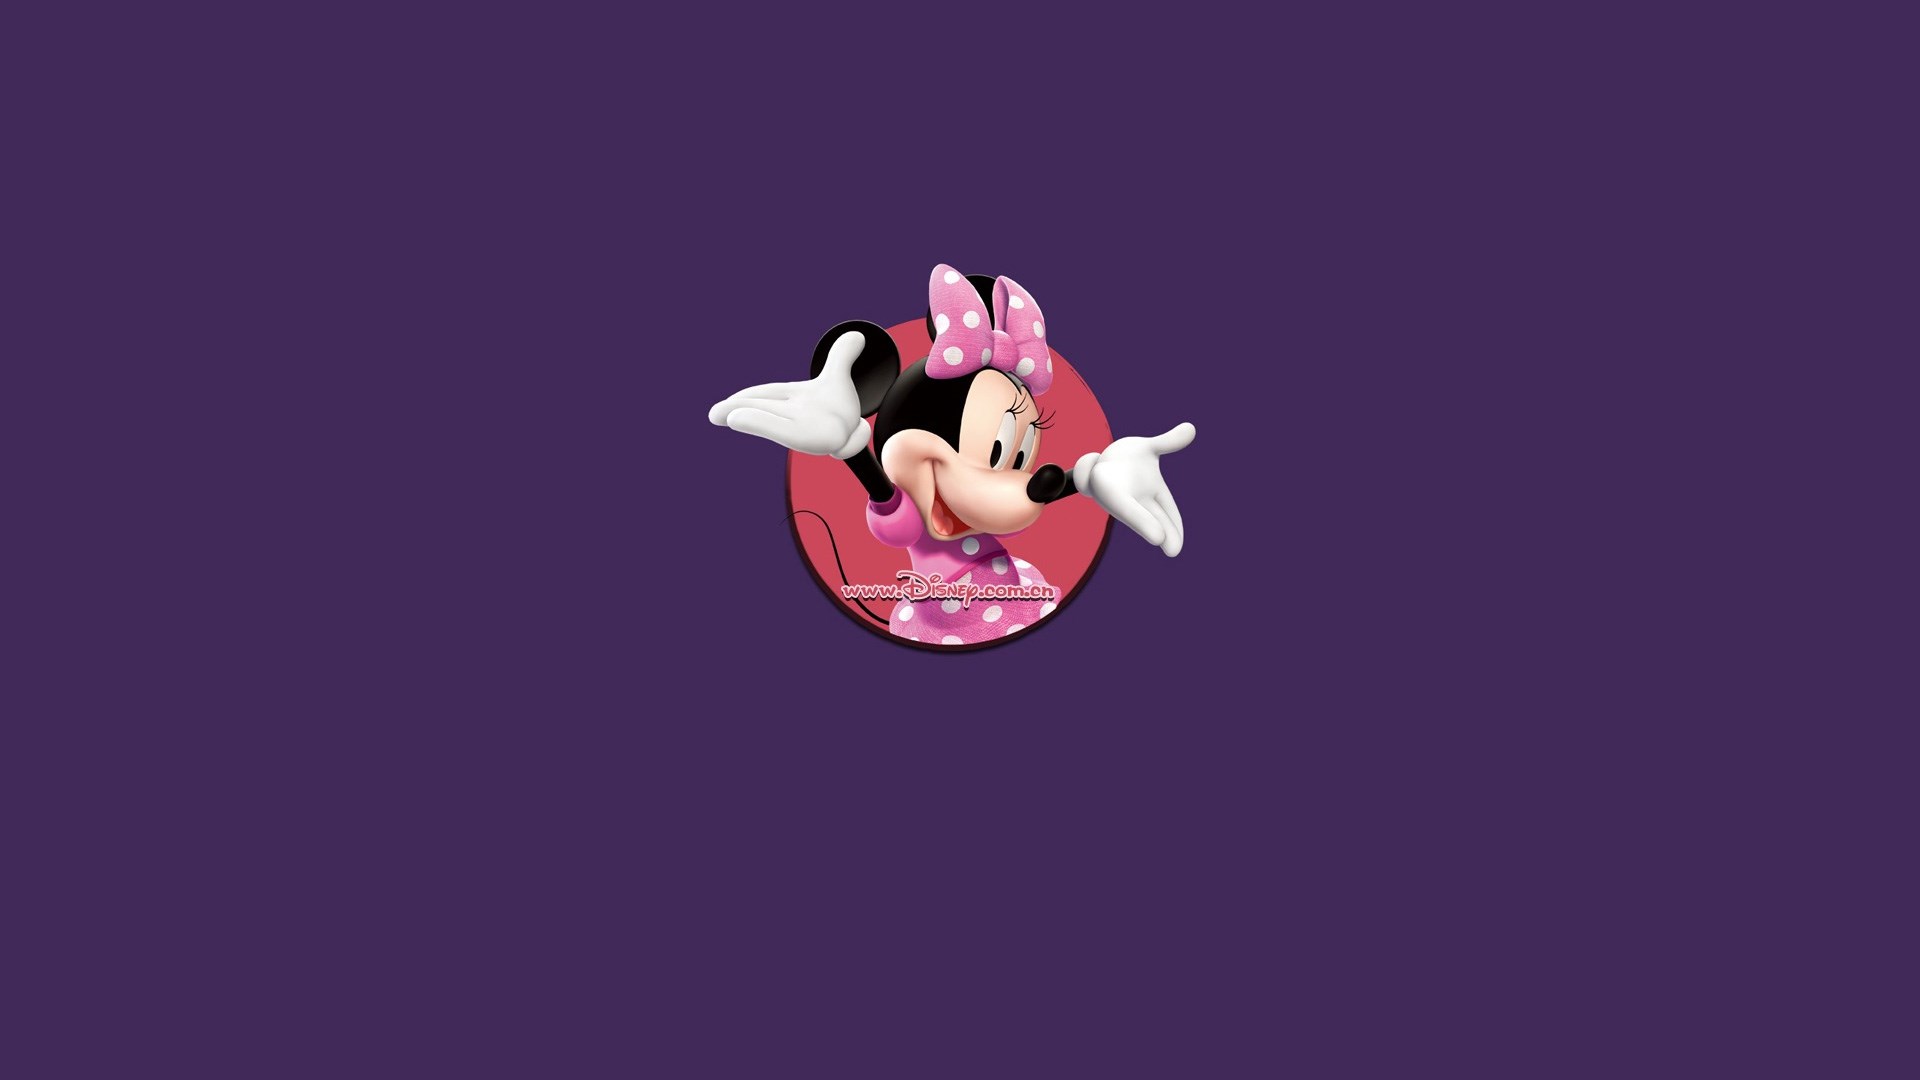 Minnie Mouse Pic Full Hd Backgrounds 1920 X 1080 Kb - Cartoon , HD Wallpaper & Backgrounds